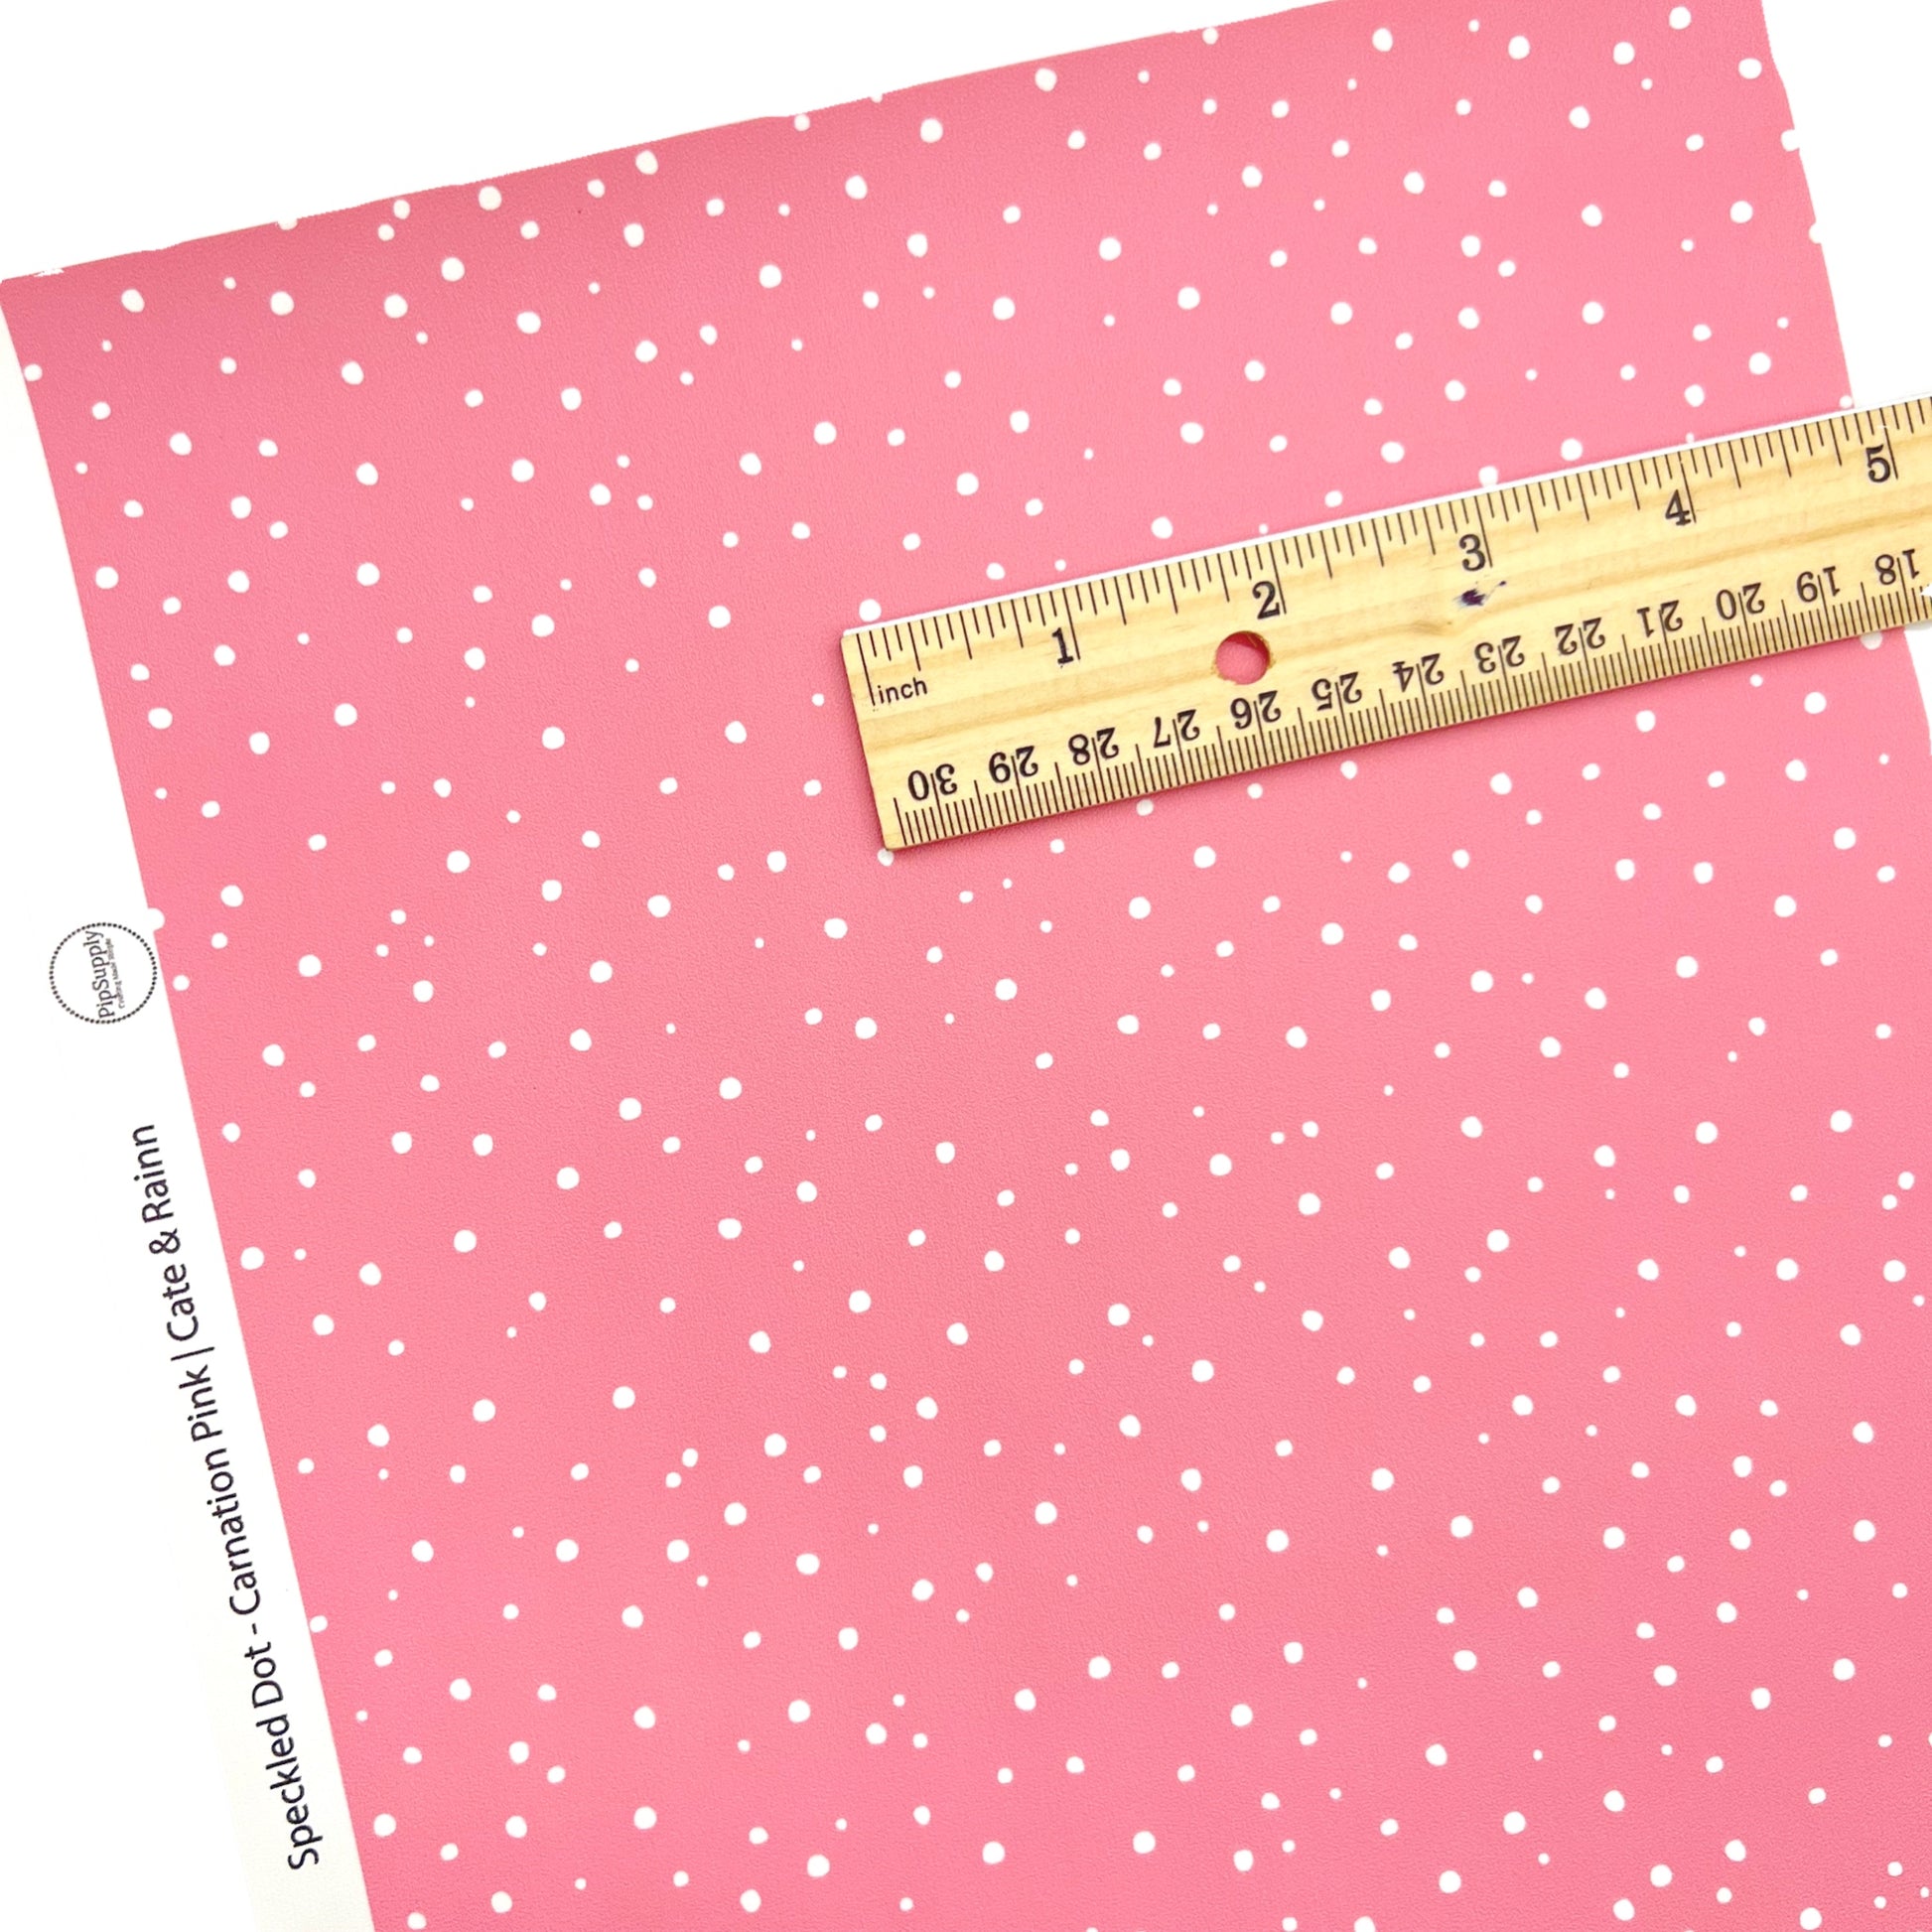 Pink pattern with white speckled dot faux leather sheet.